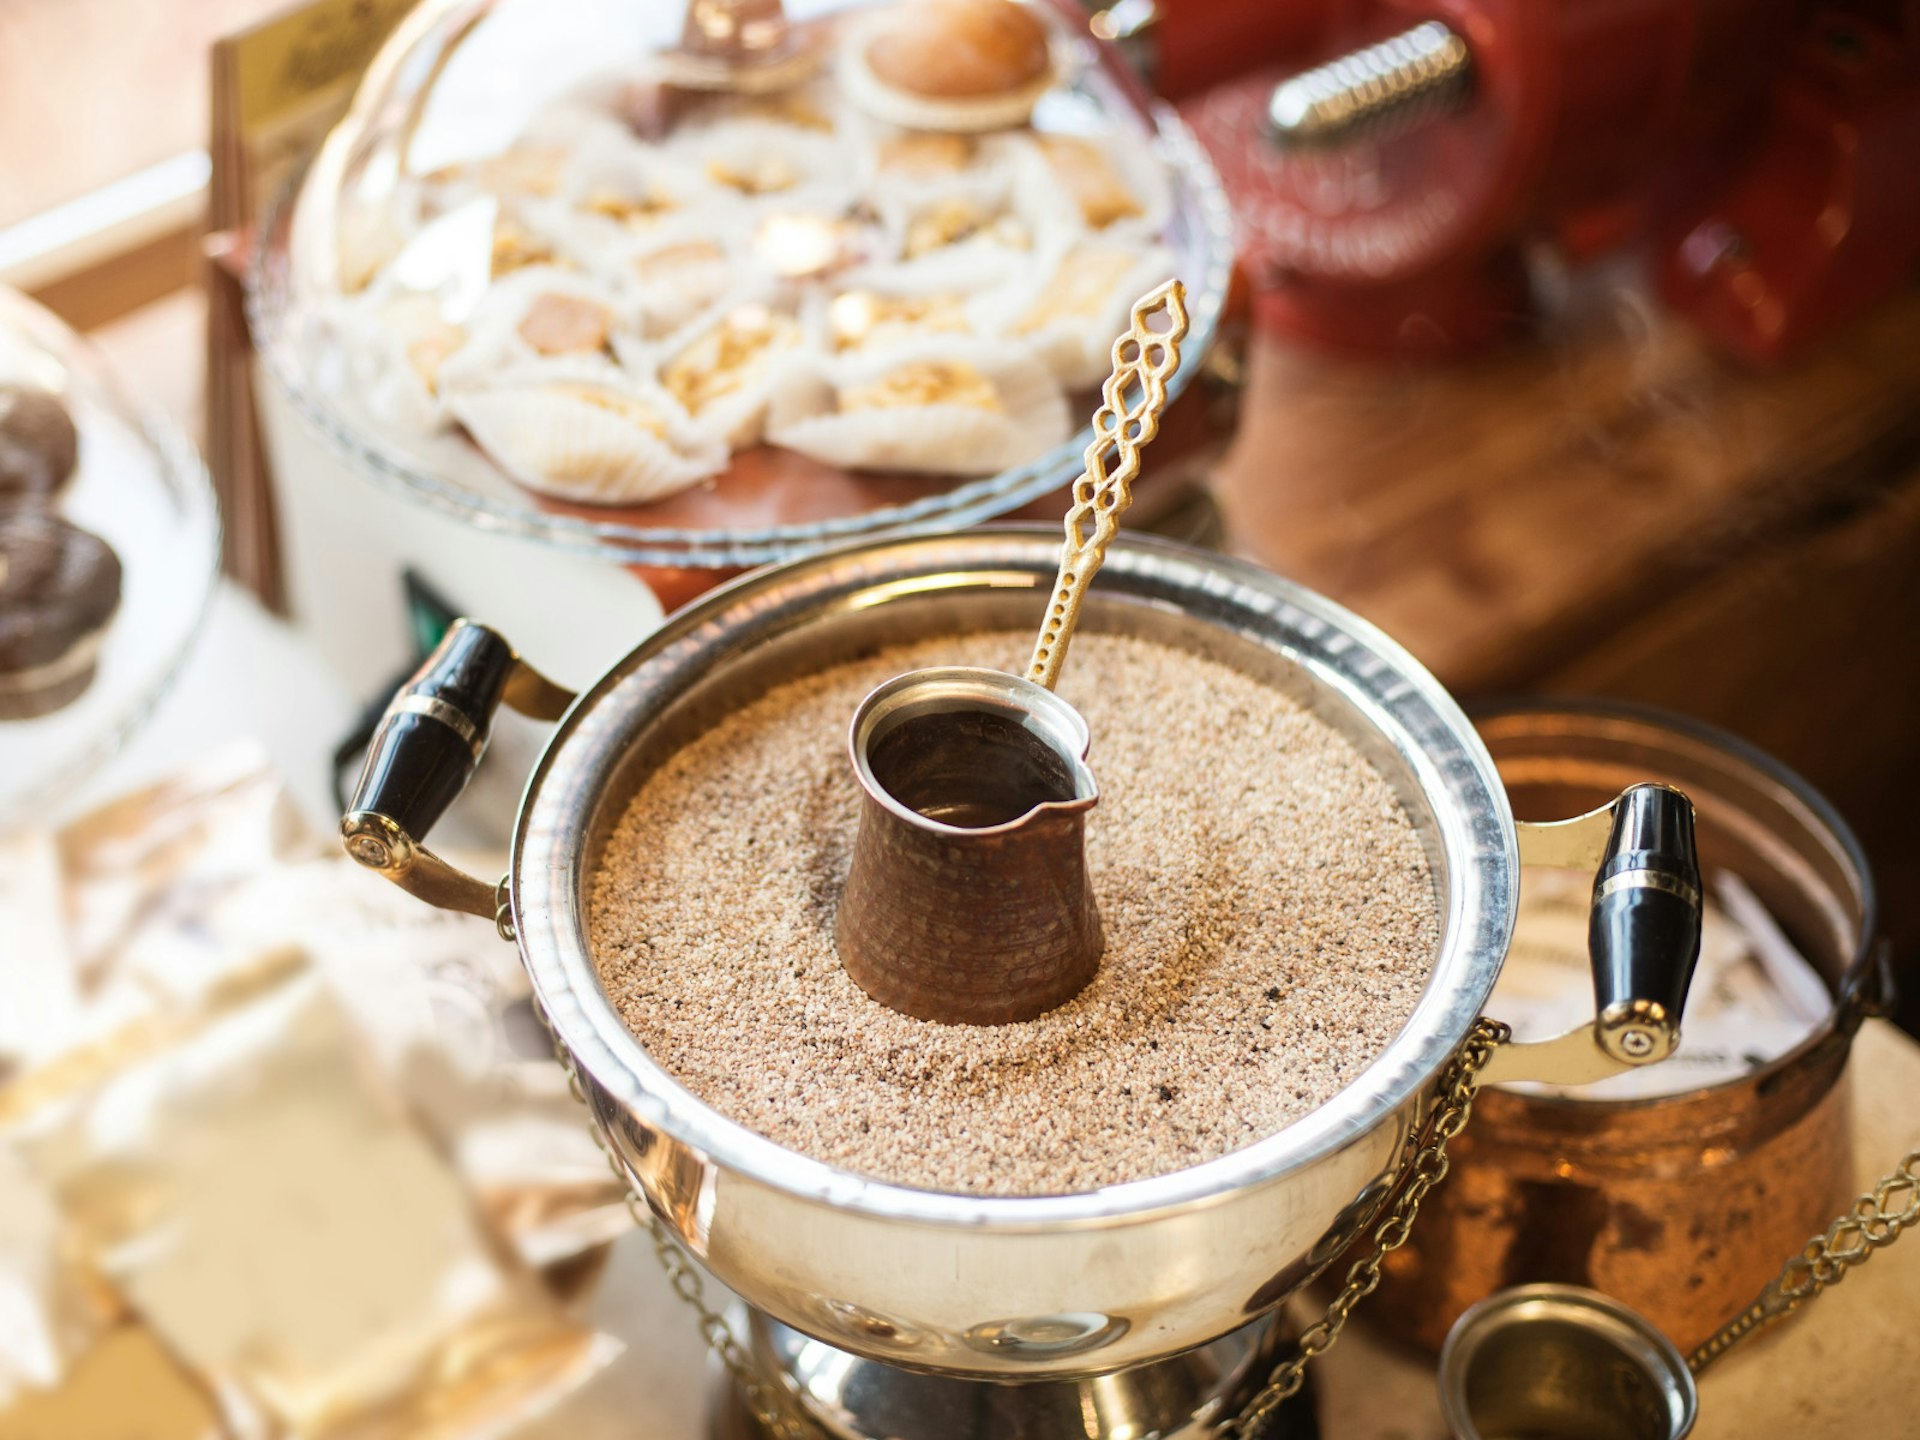 You can still see Turkish coffee prepared the traditional way in a Tirana cafe © Alla Simacheva / Shutterstock